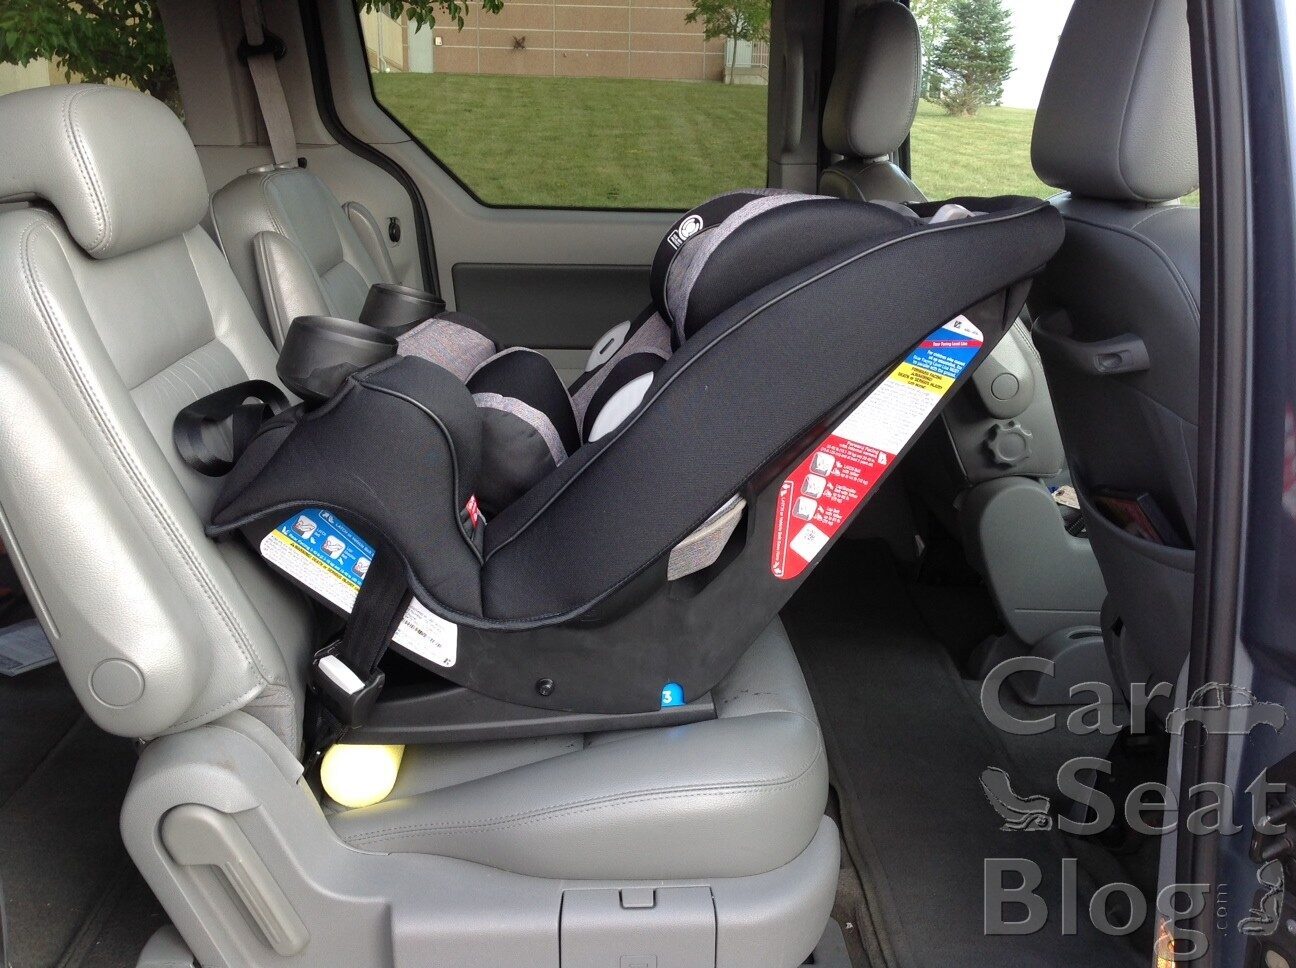 Safety 1st Grow and Go 3-in-1 Car Seat Review - Car Seats For The Littles